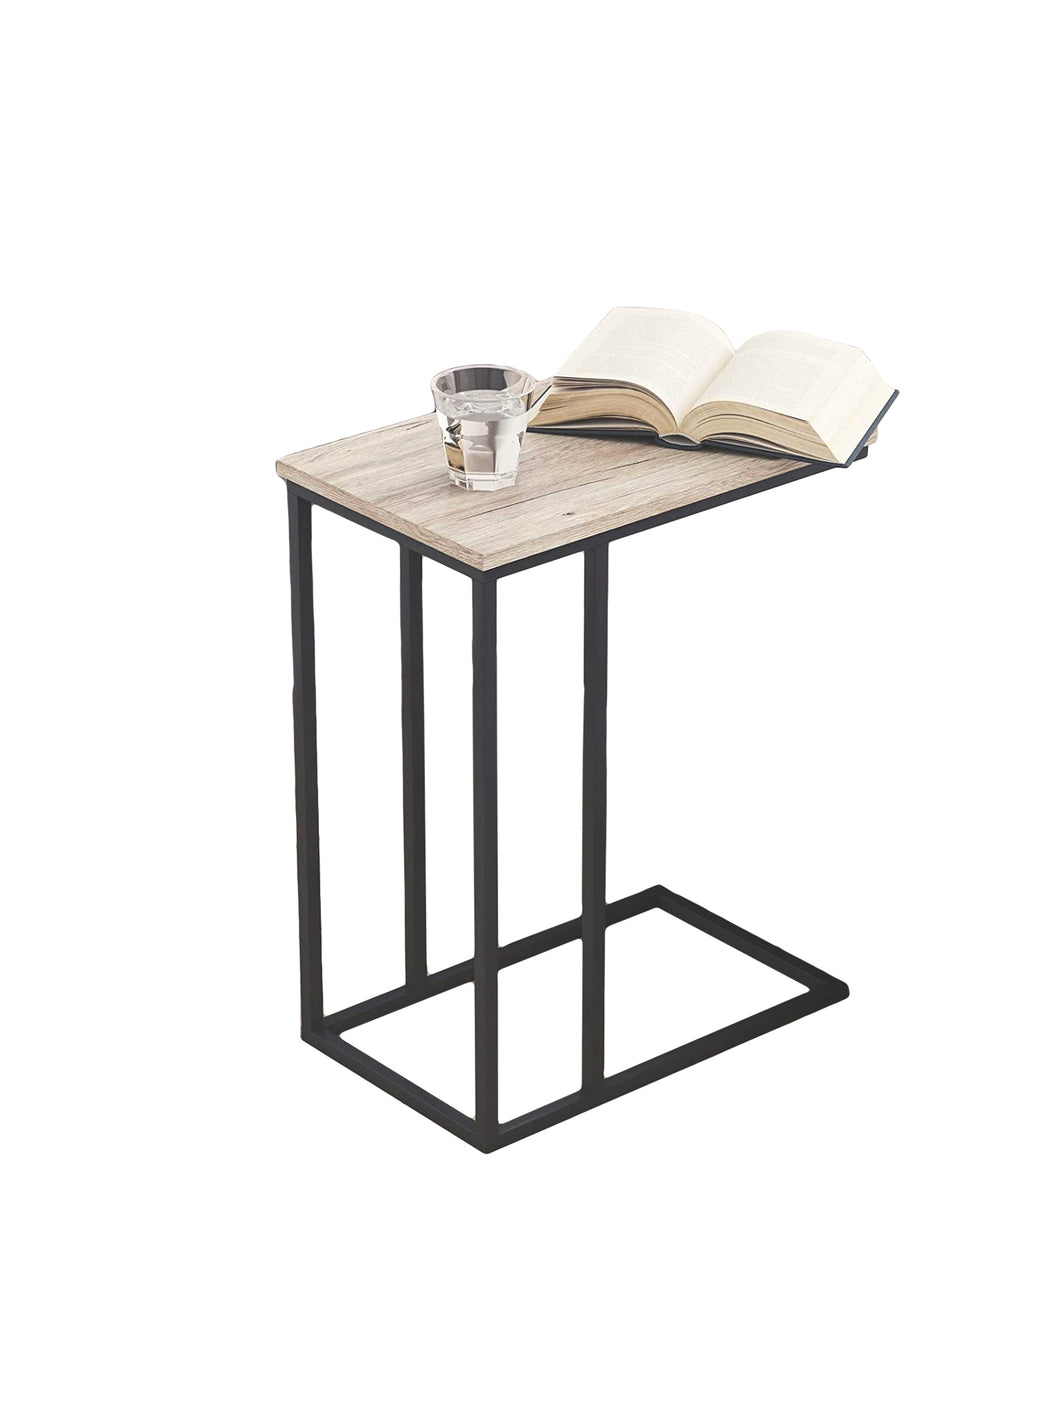 C-Shaped Snack Side Table For Living Room, Bedroom, And Entryway